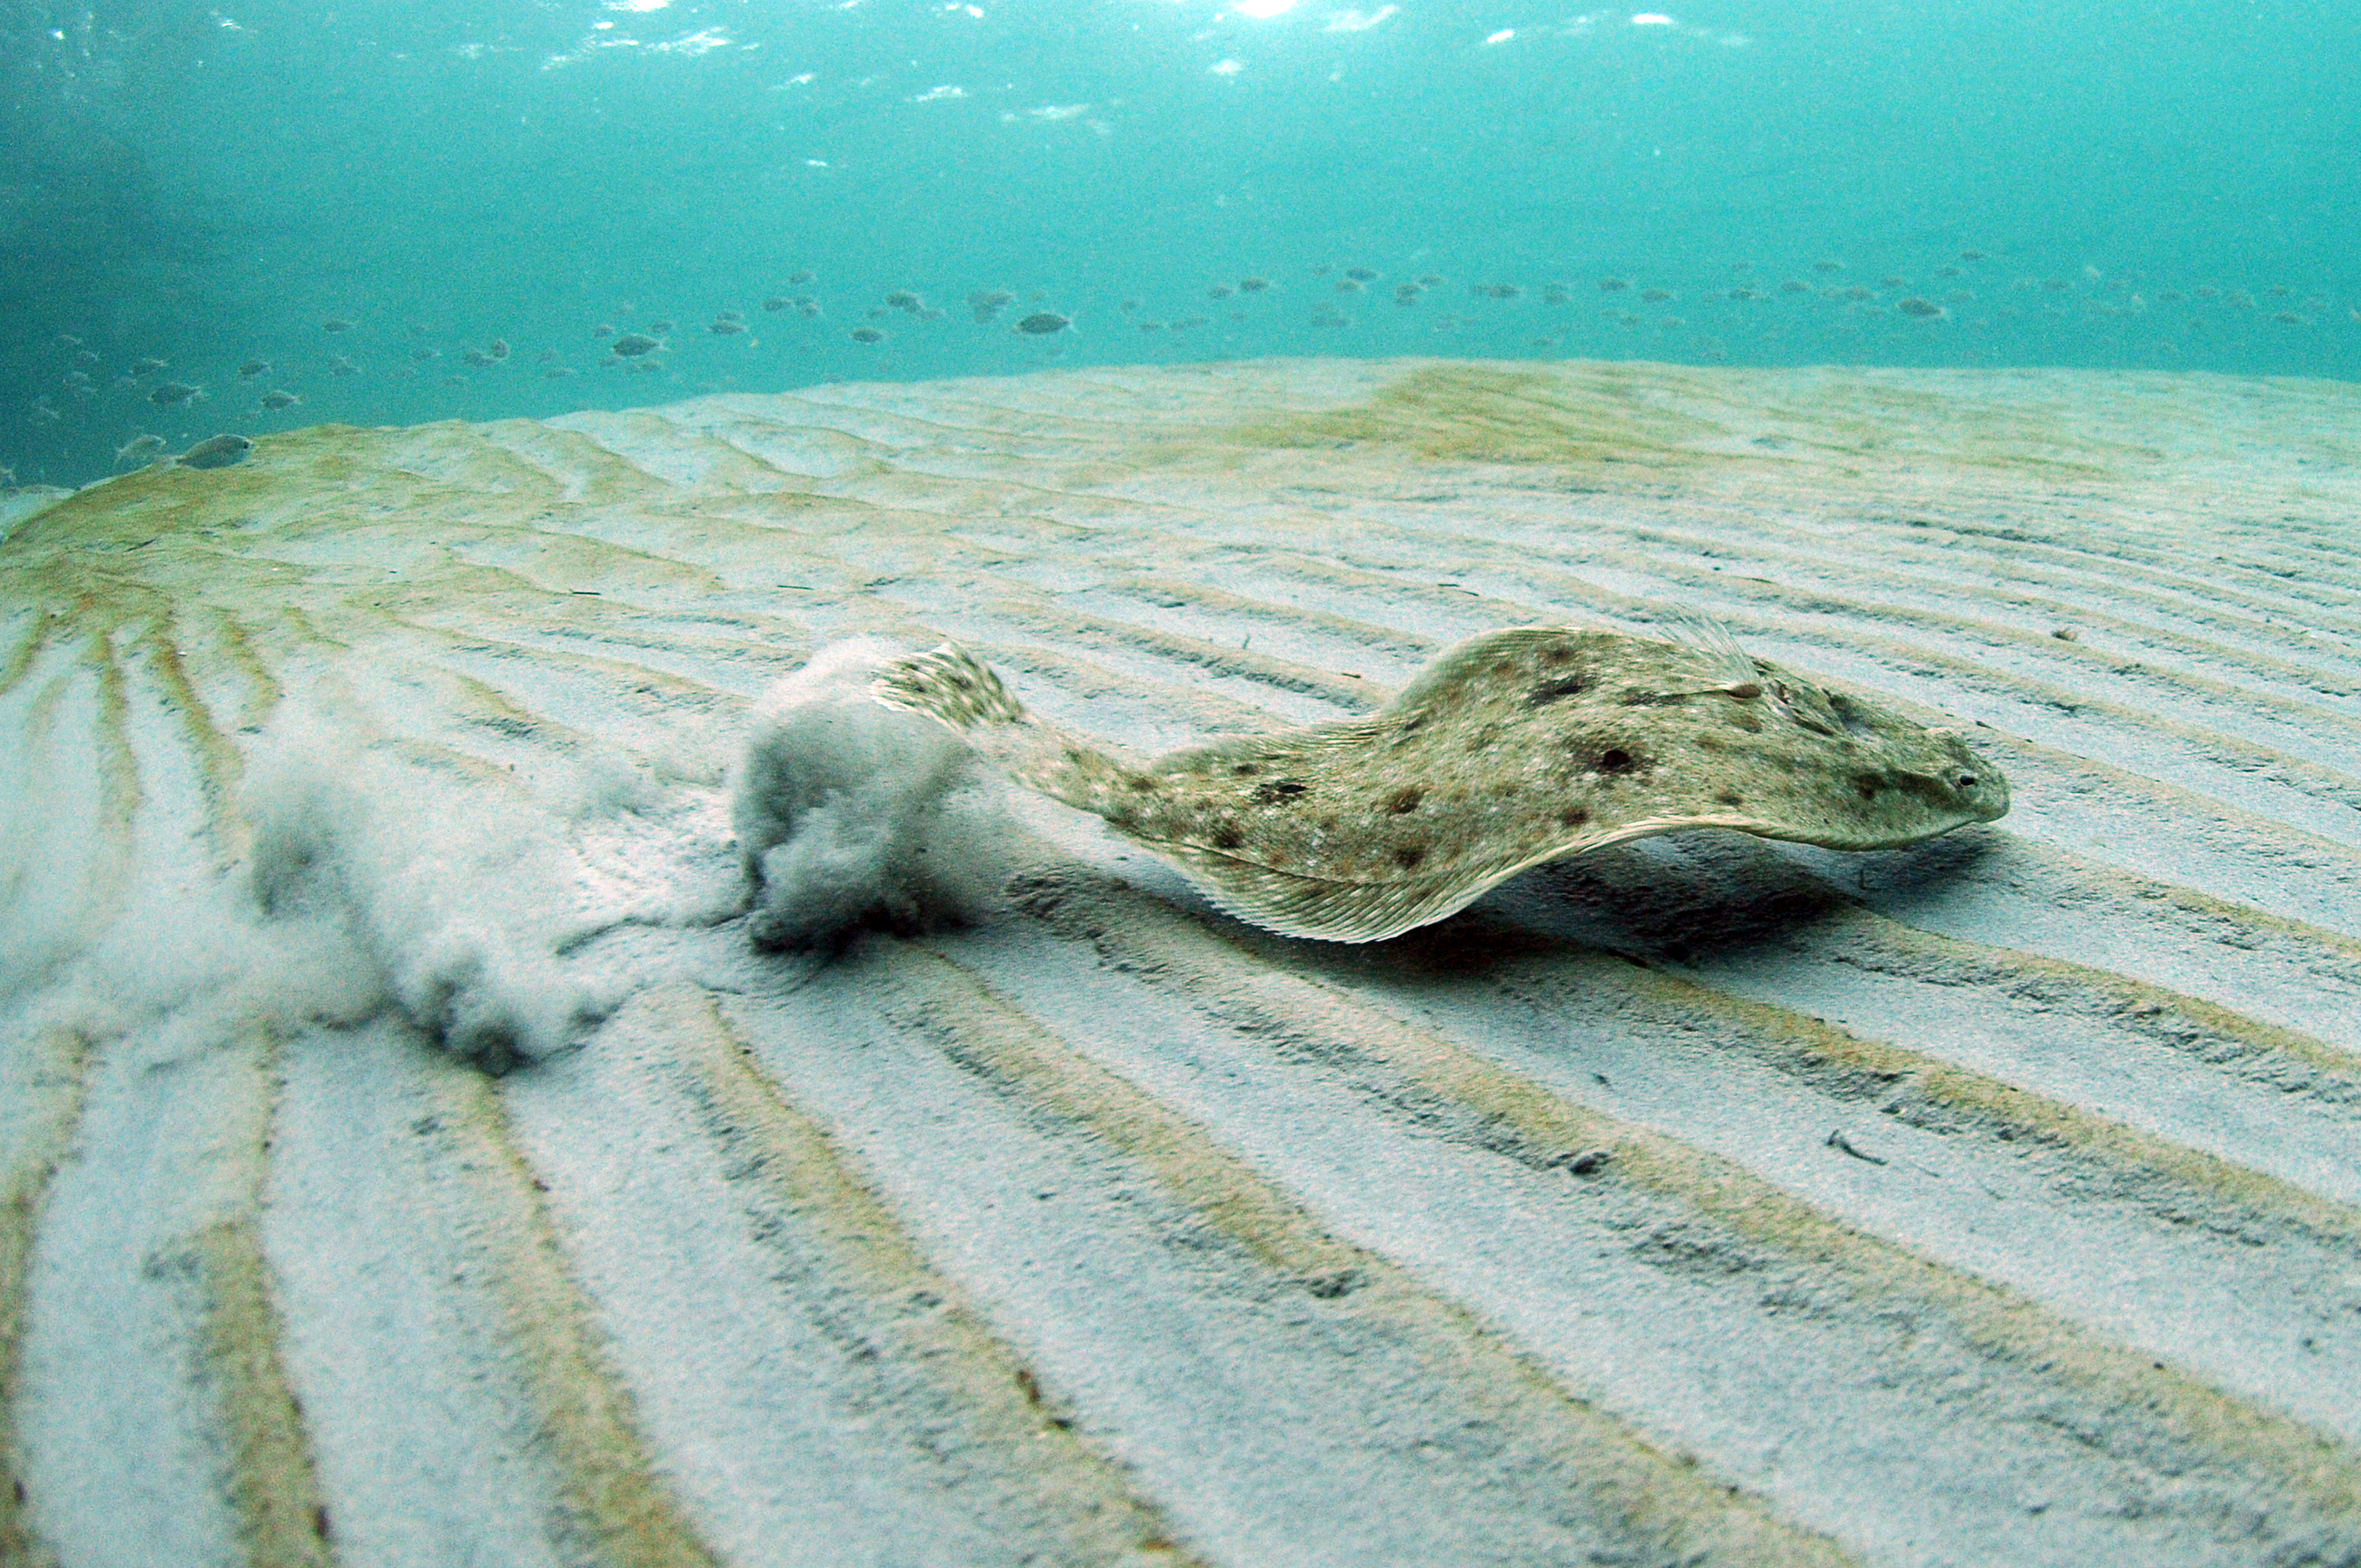 Flounder fish swimming along seabed